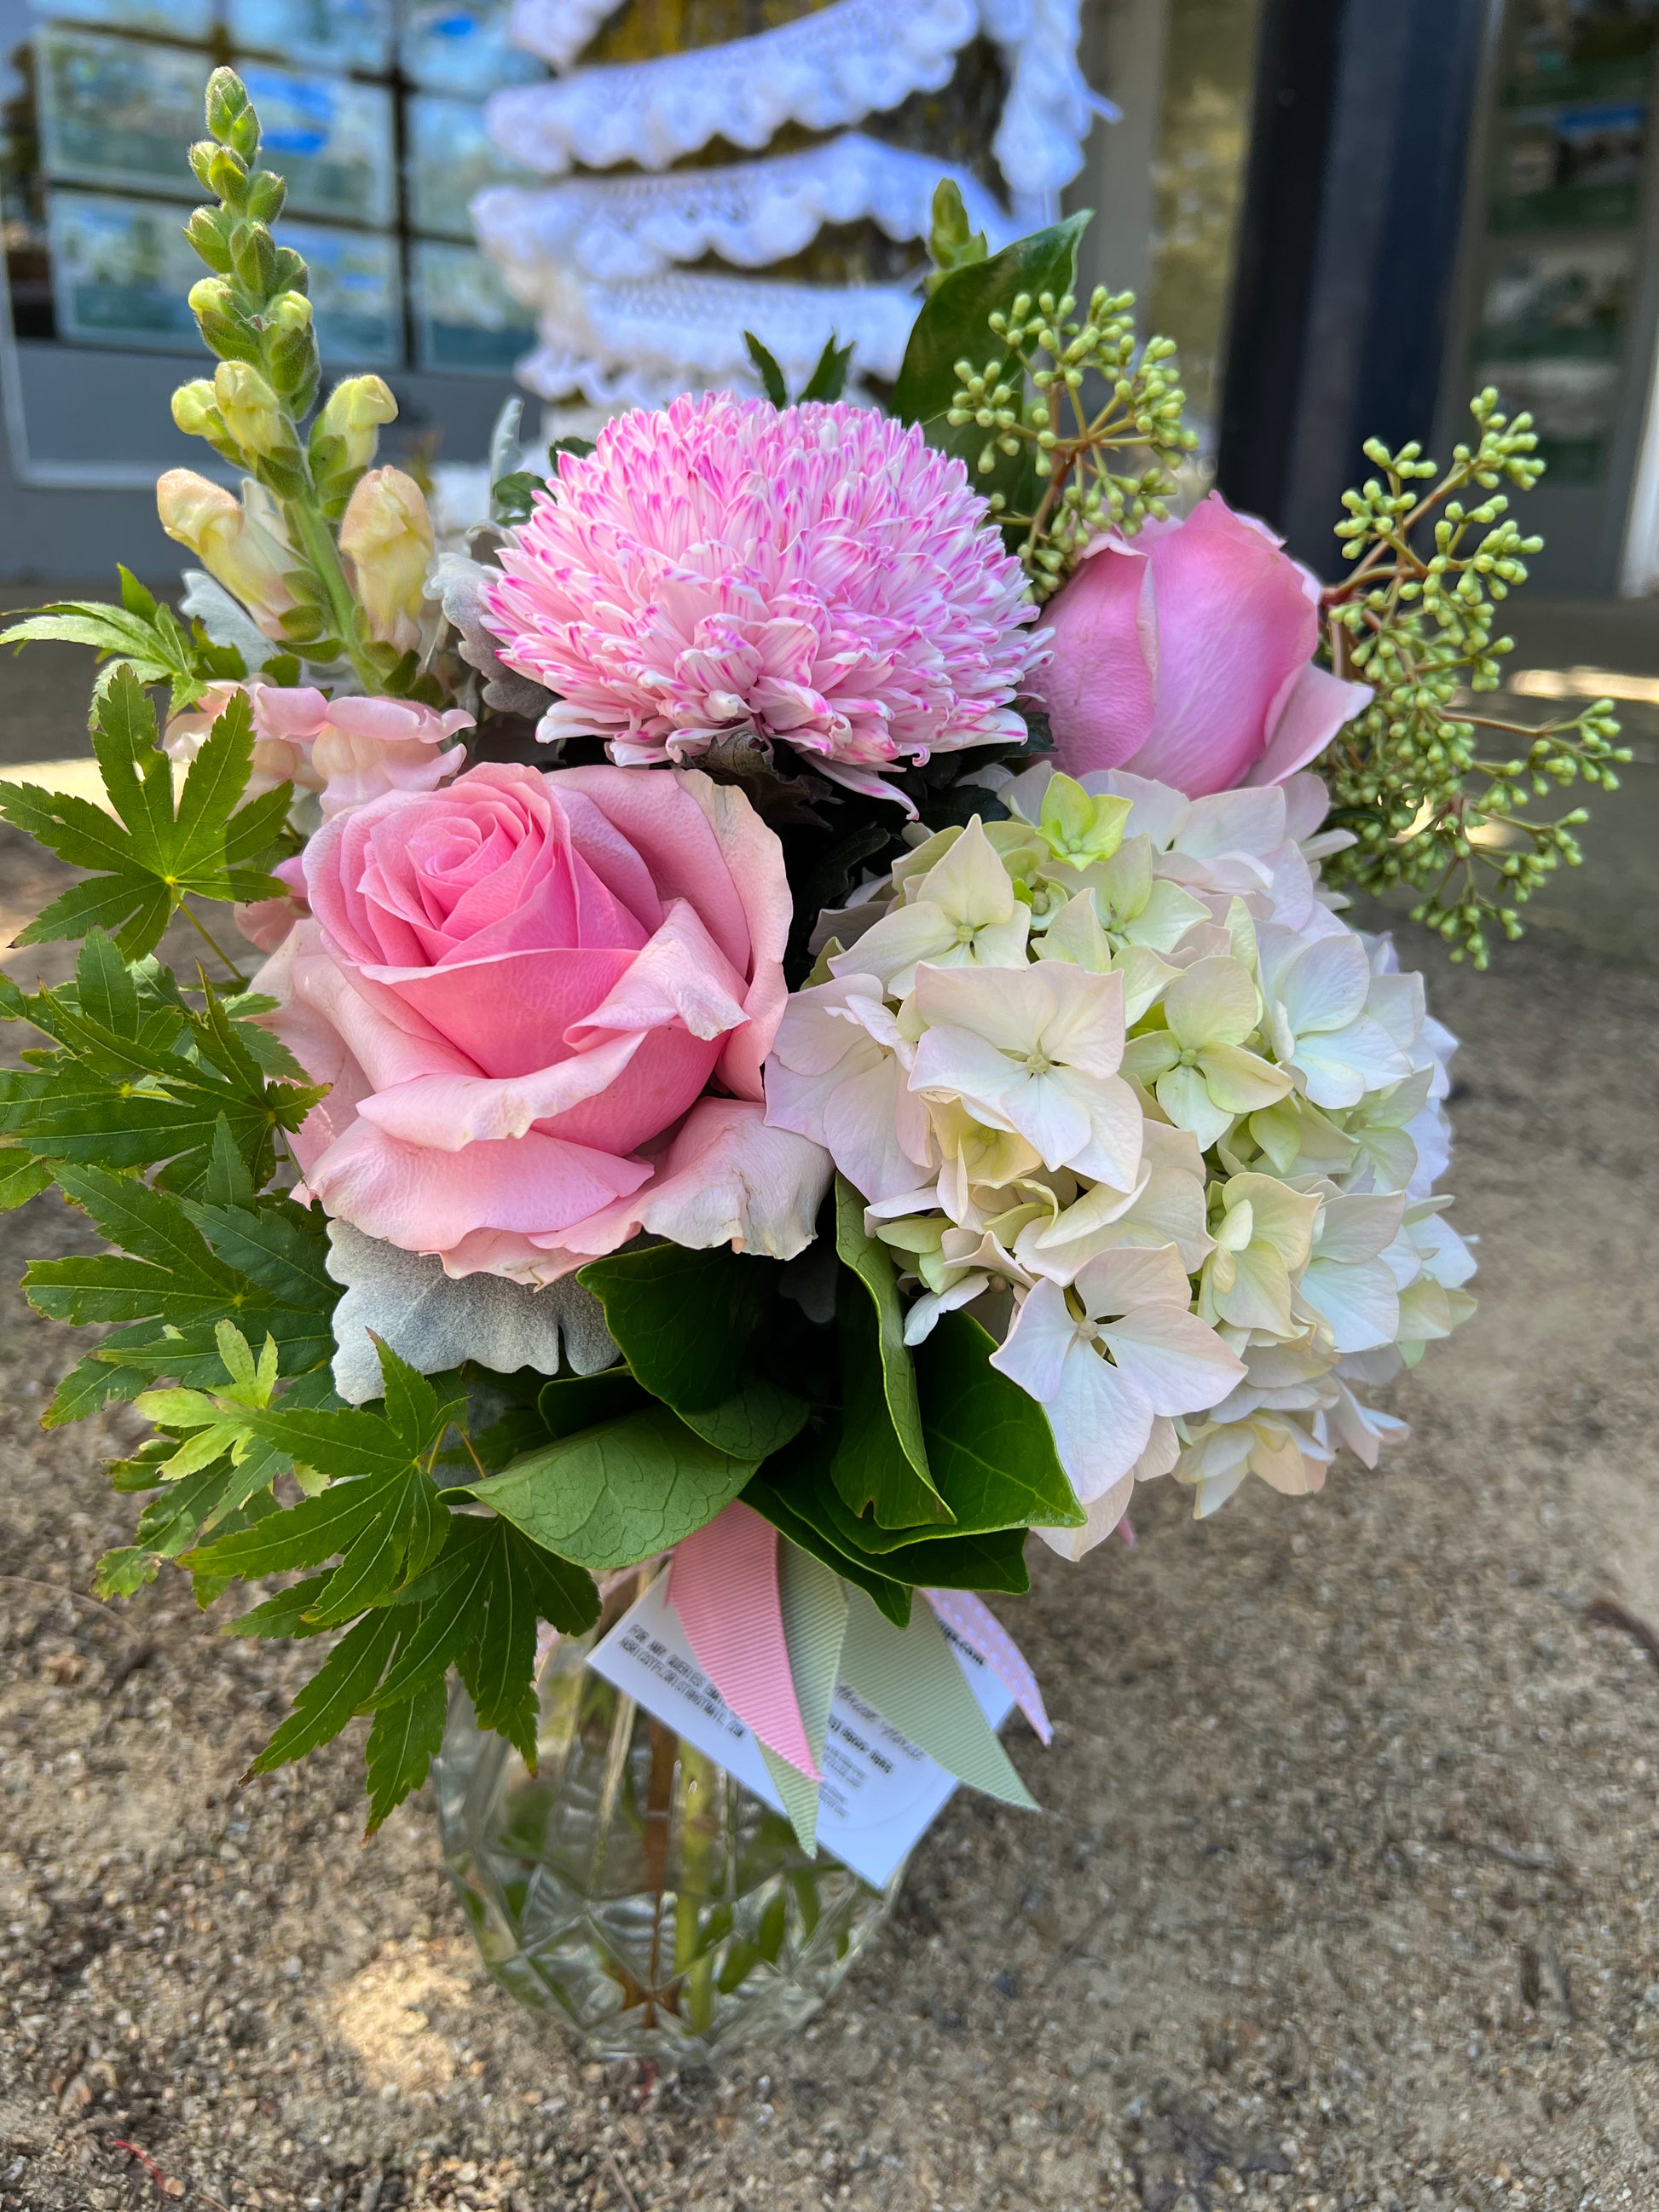 pink vase arrangement flowers in a vase pastel for delivery within the Mornington Peninsula Mornington Florist Mount Eliza florist birthday flowers anniversary flowers sympathy flowers get well soon flowers just because congratulations